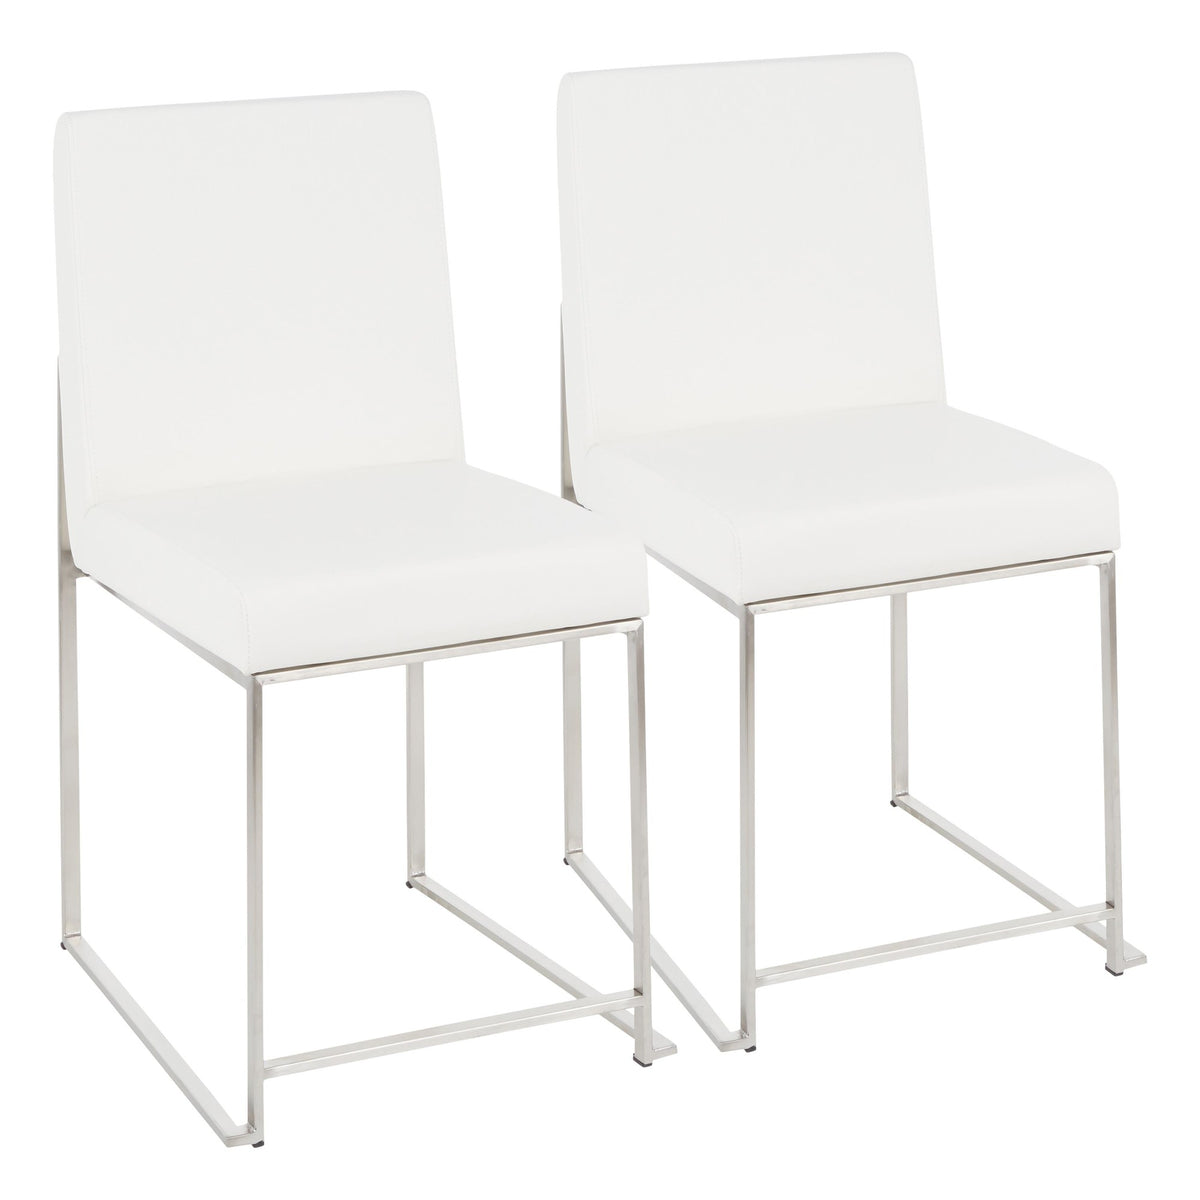 LUMISOURCE HIGH BACK FUJI DINING CHAIR - SET OF 2